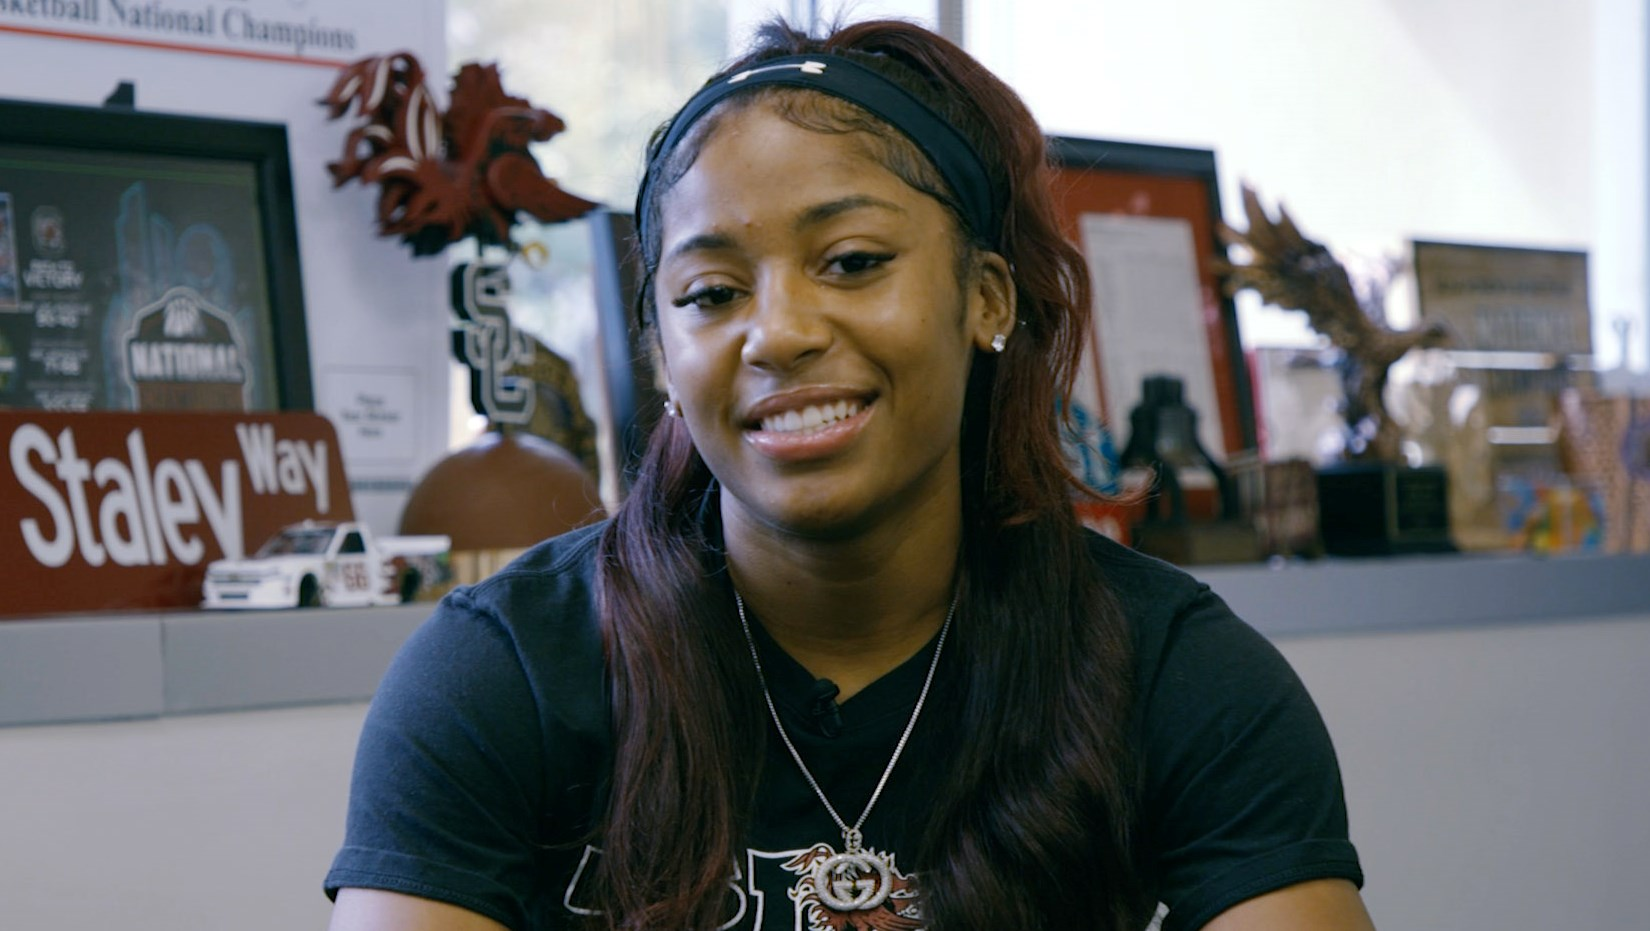 WATCH: Te'a Cooper Shares Her Journey Back to the Court